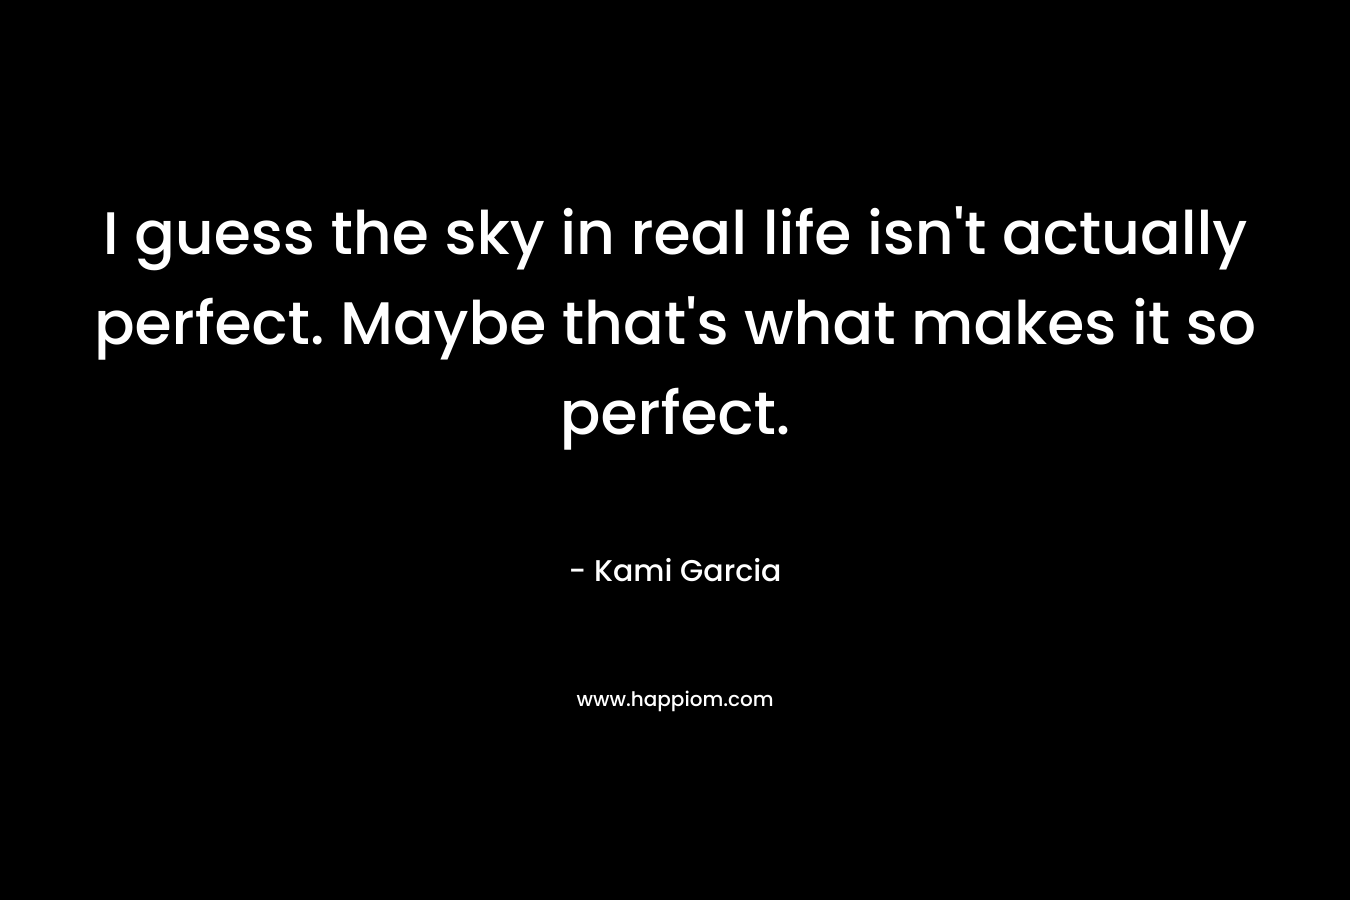 I guess the sky in real life isn't actually perfect. Maybe that's what makes it so perfect.